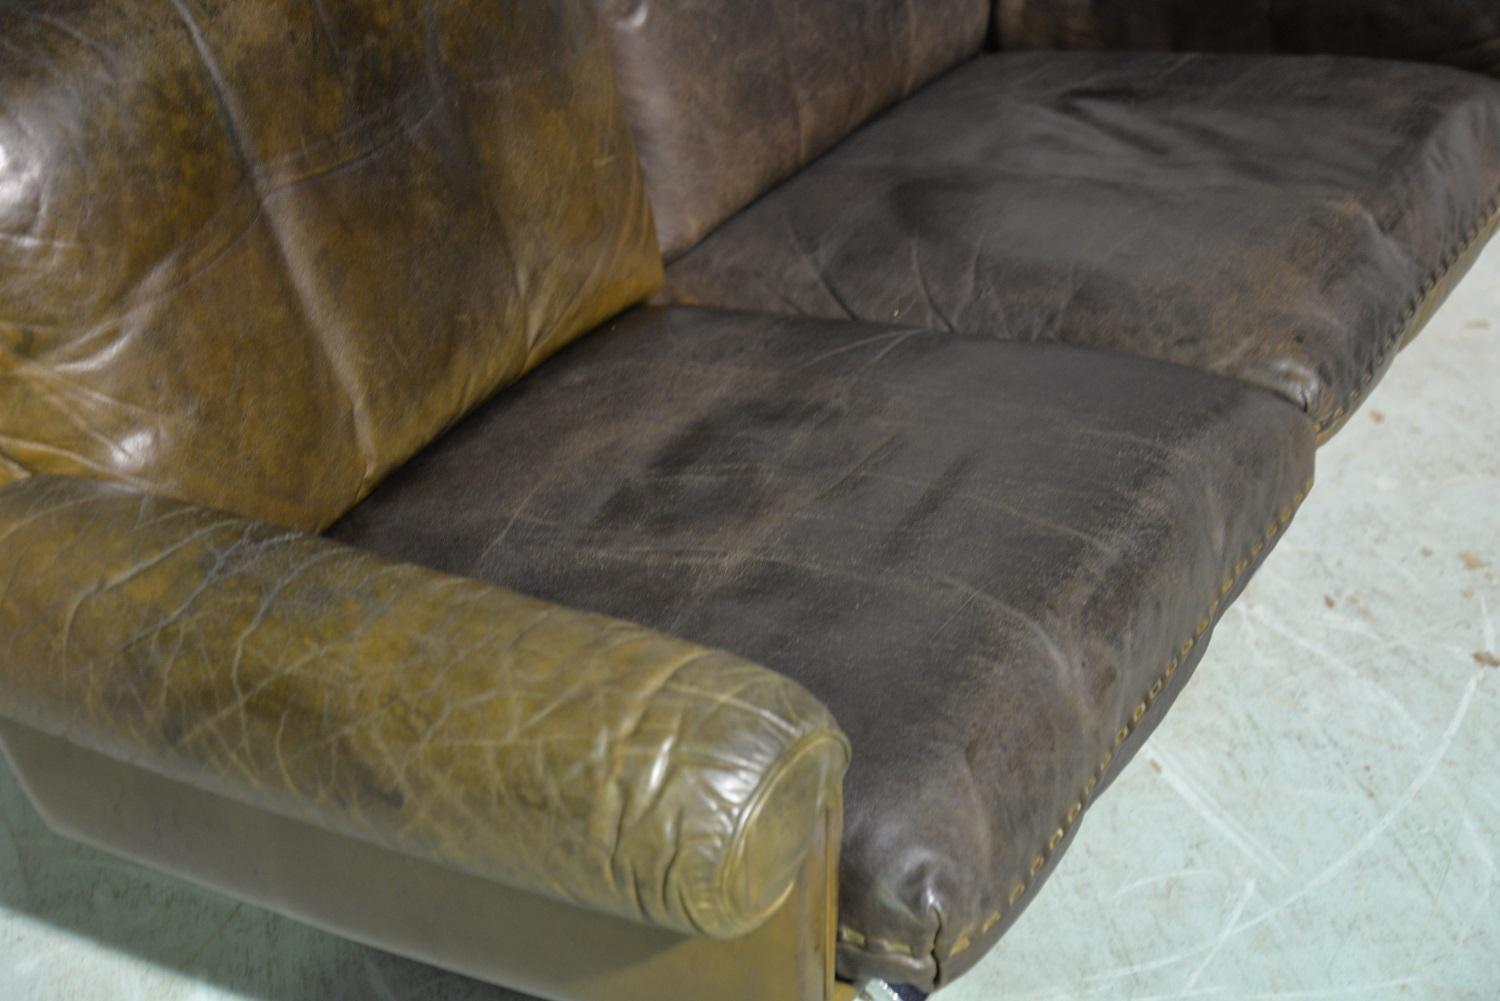 Vintage De Sede DS 31 Leather Two-Seat Sofa or Loveseat, Switzerland, 1970s For Sale 7